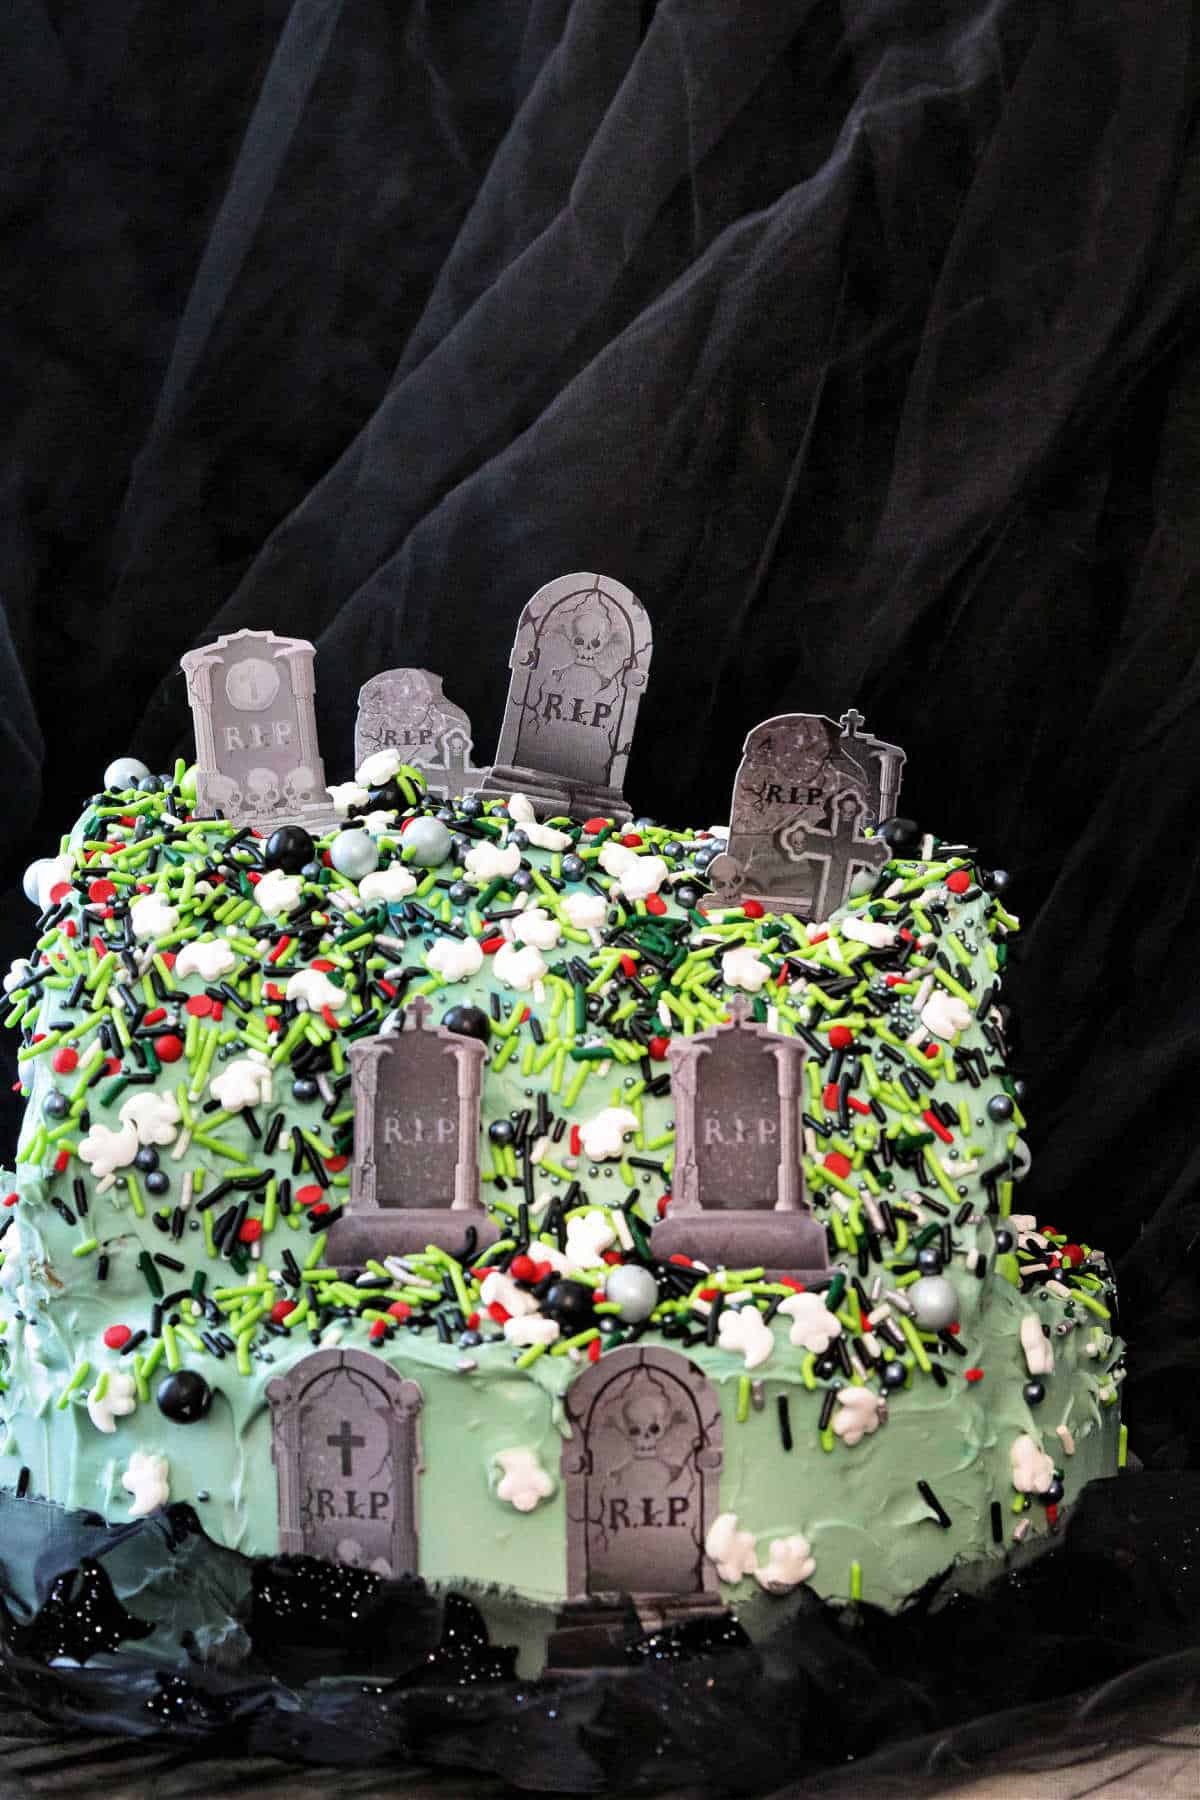 A "hilltop graveyard cake" that is iced in blue-ish gray frosting with multicolored sprinkles. It has small, gray, cardstock headstones stuck in it at intervals so it looks like a graveyard.